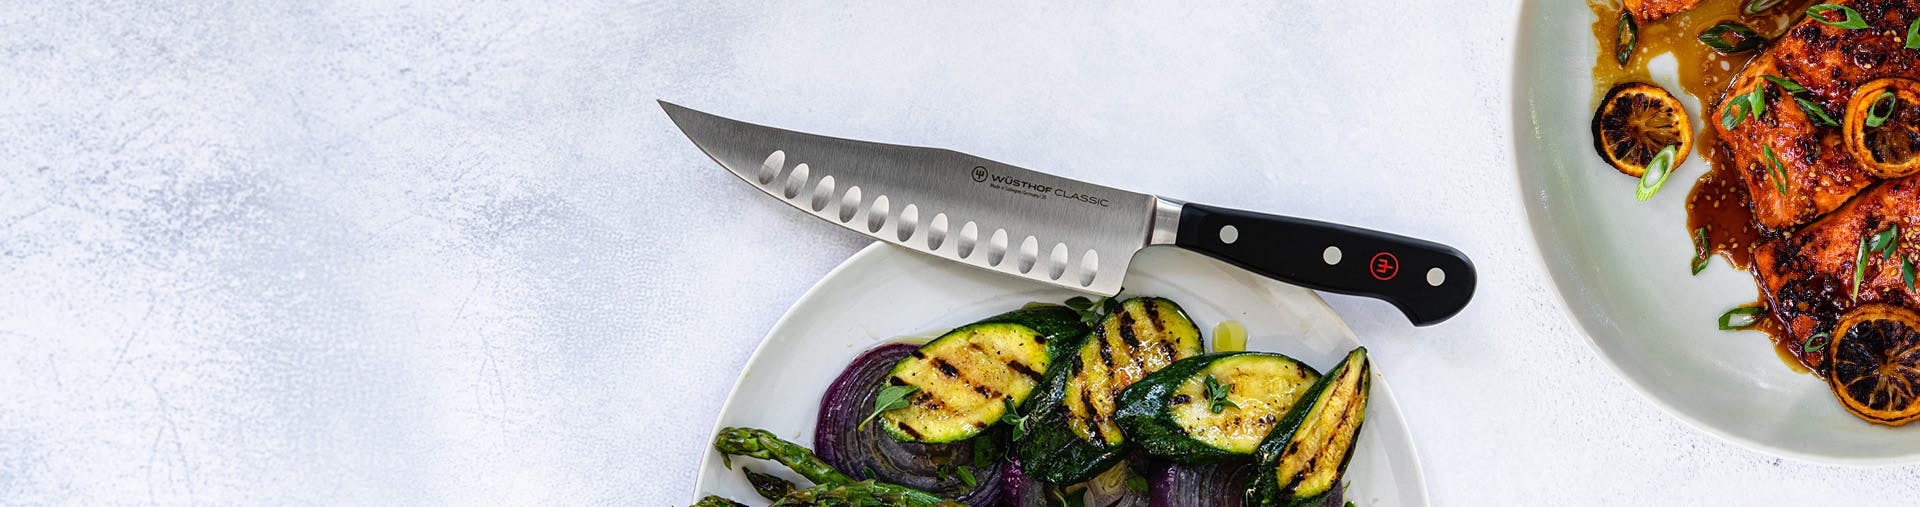 Knife on counter with zucchini